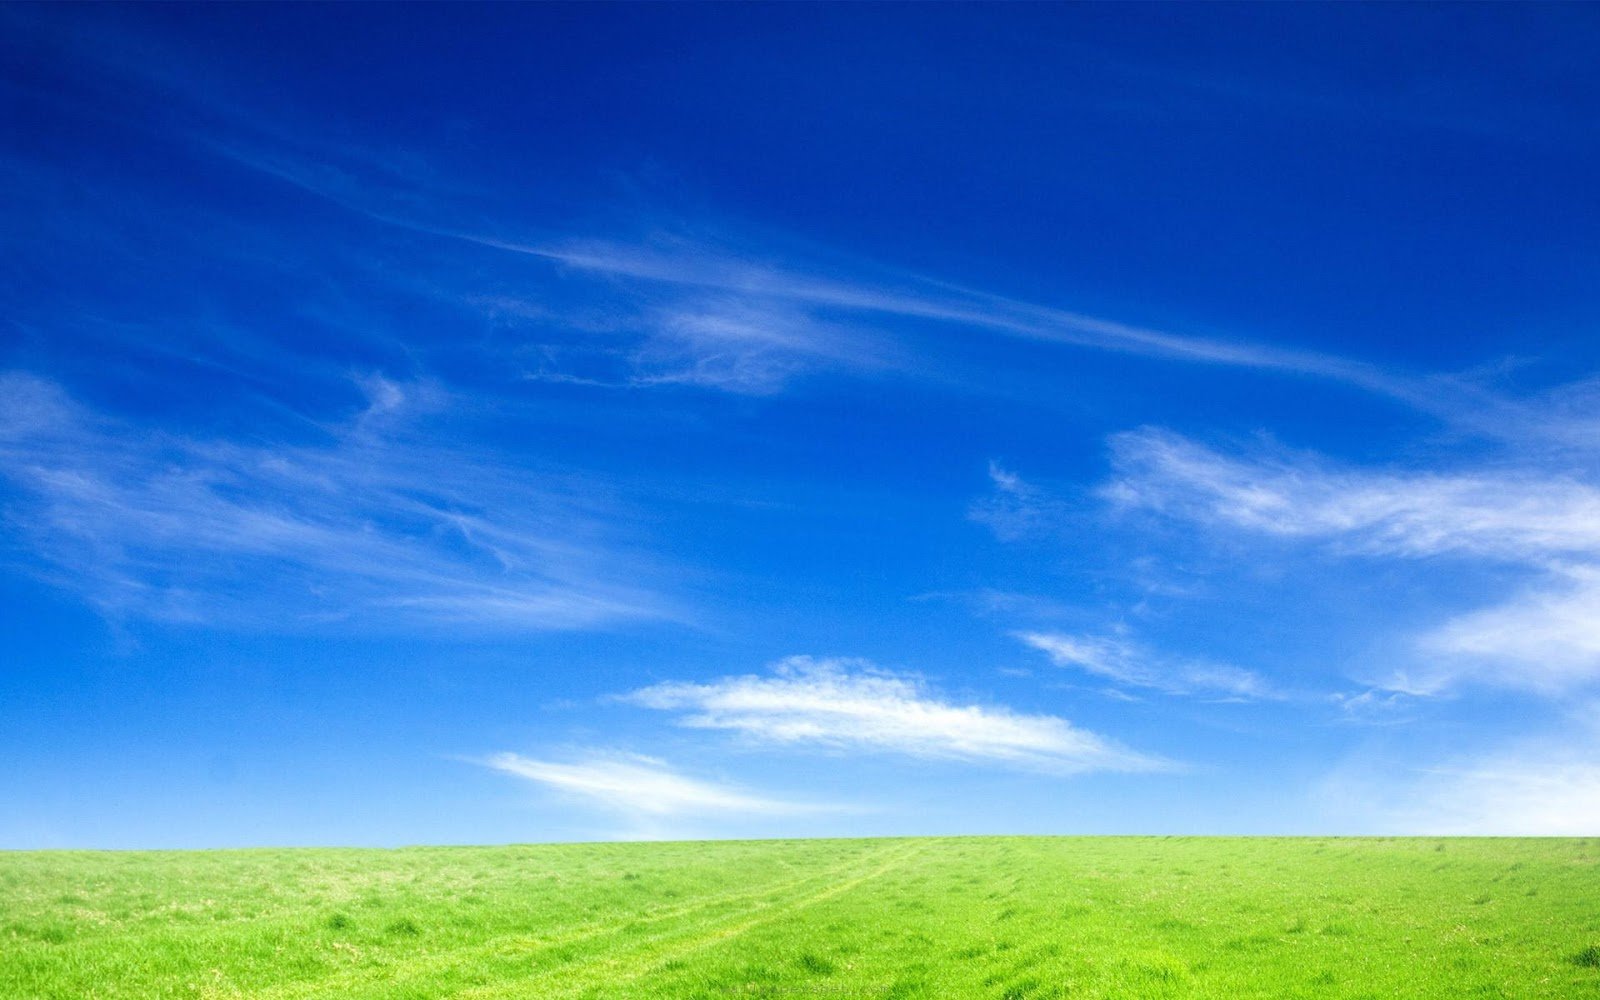 Blue Nature Background Images wallpapers join